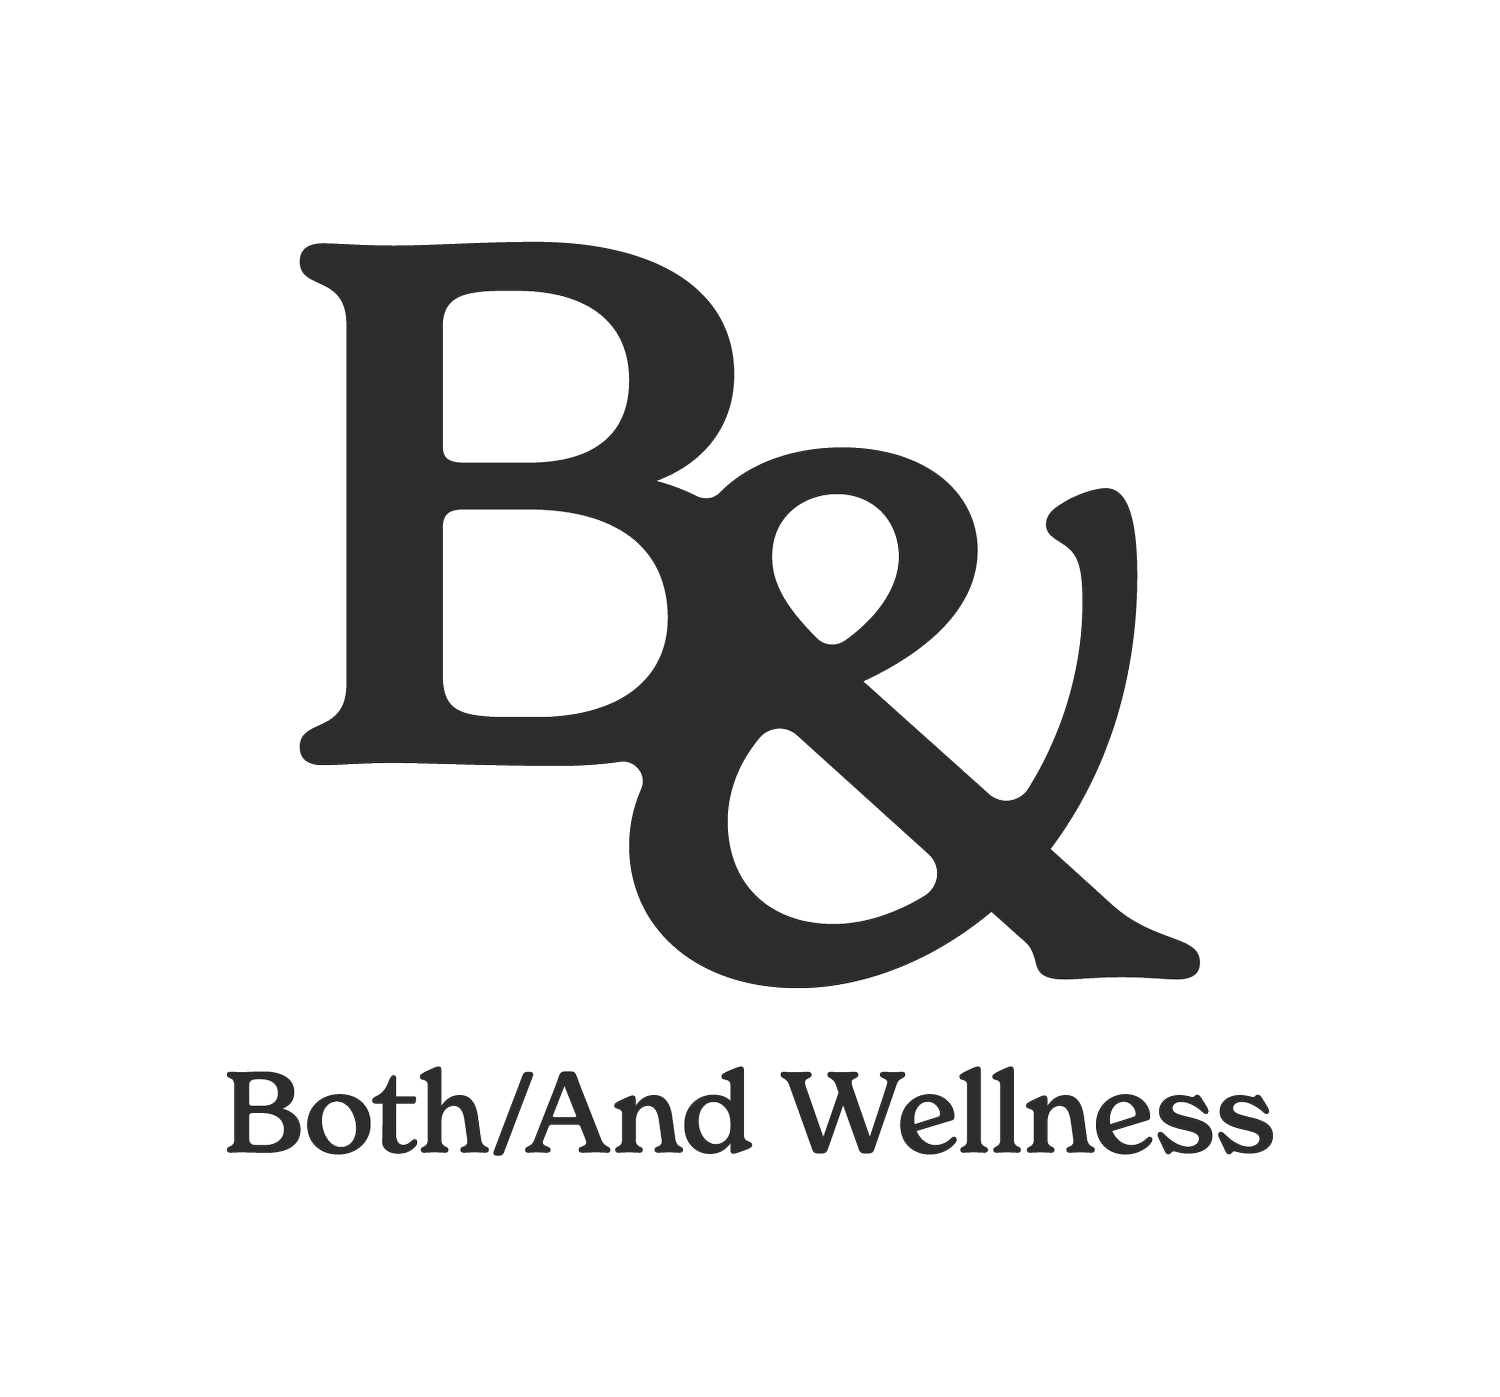 Both/And Wellness - Individual Therapy in Washington State